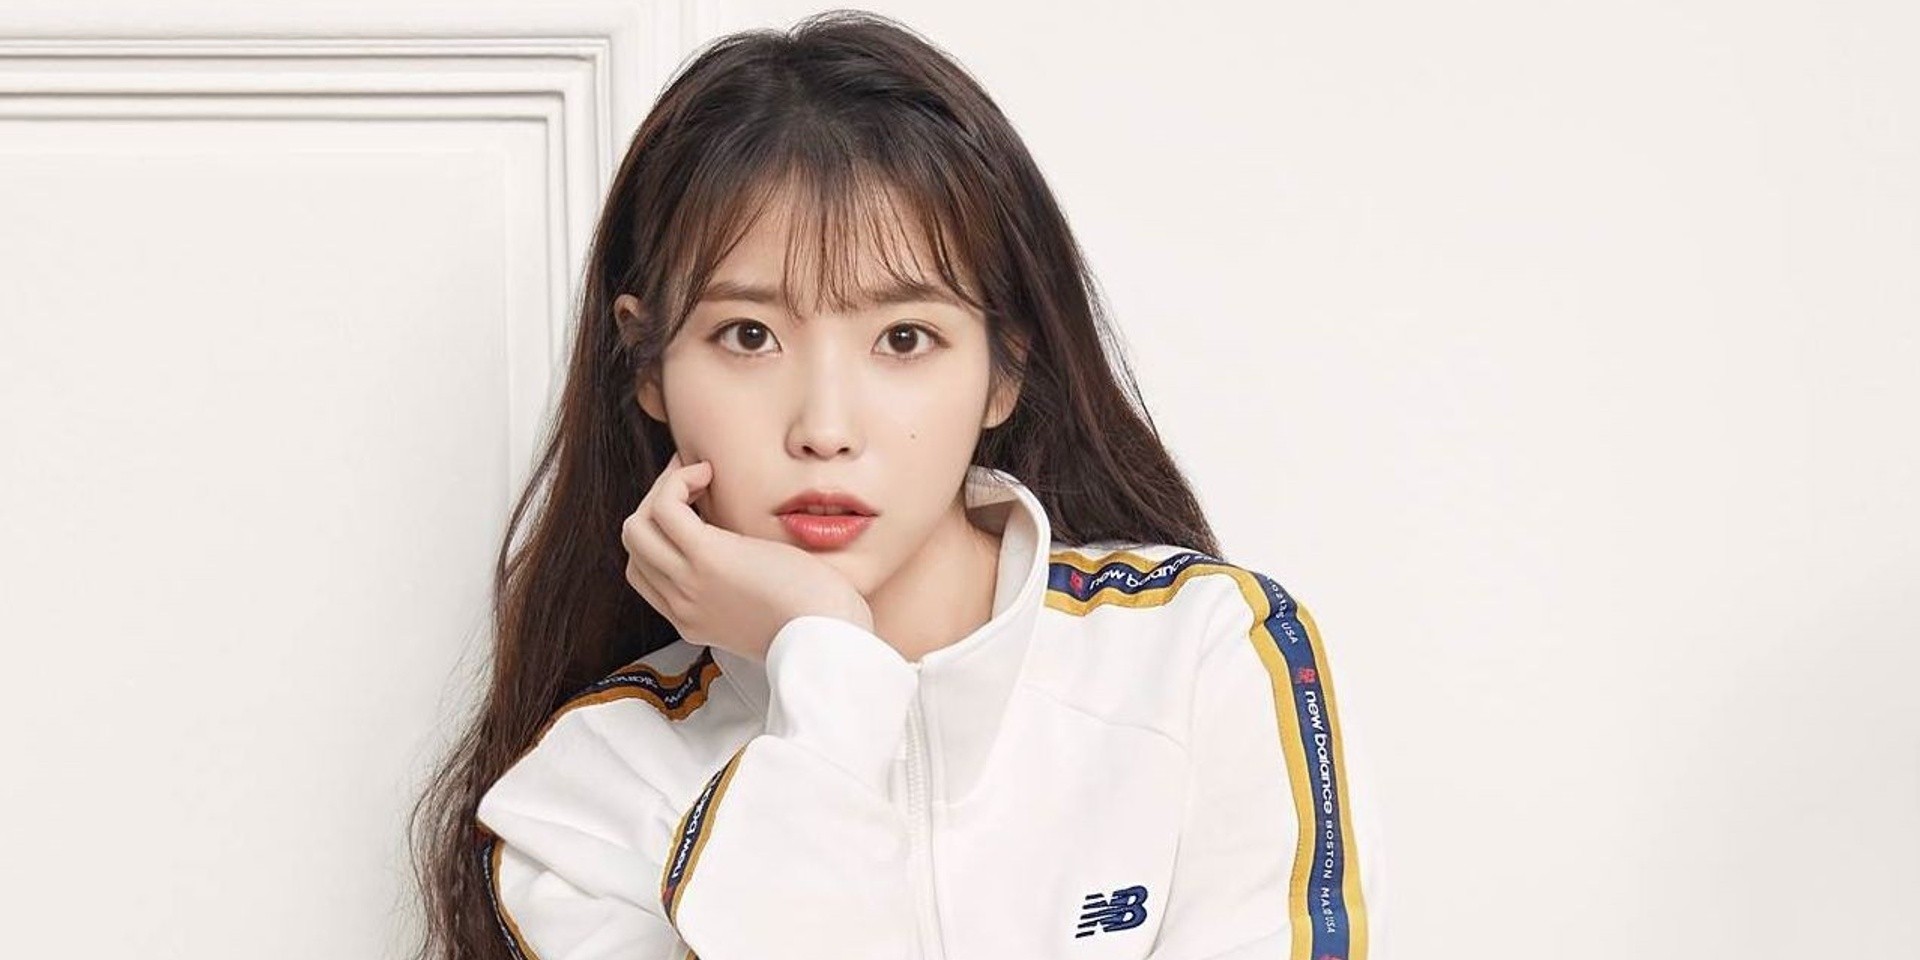 IU to perform in Singapore for the first time this December